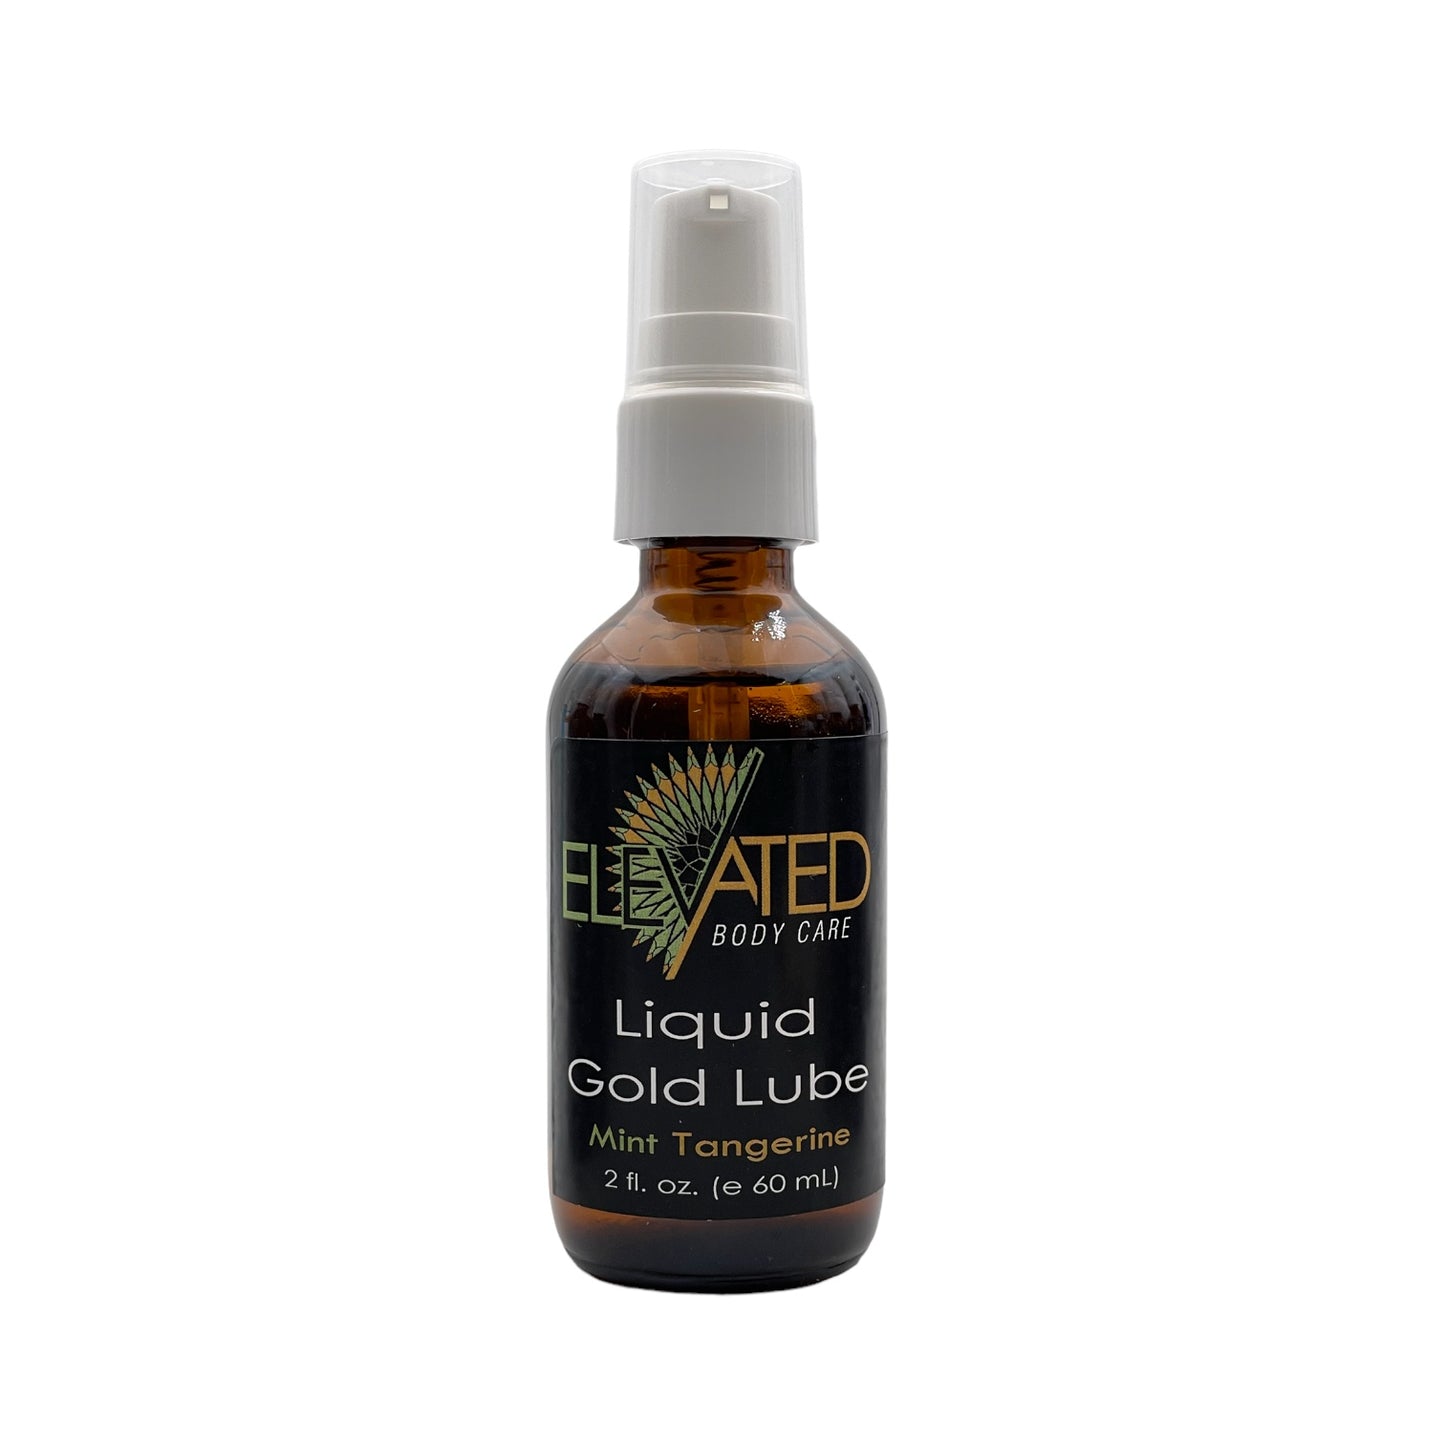 ELEVATED - Lover's Liquid Gold Lube